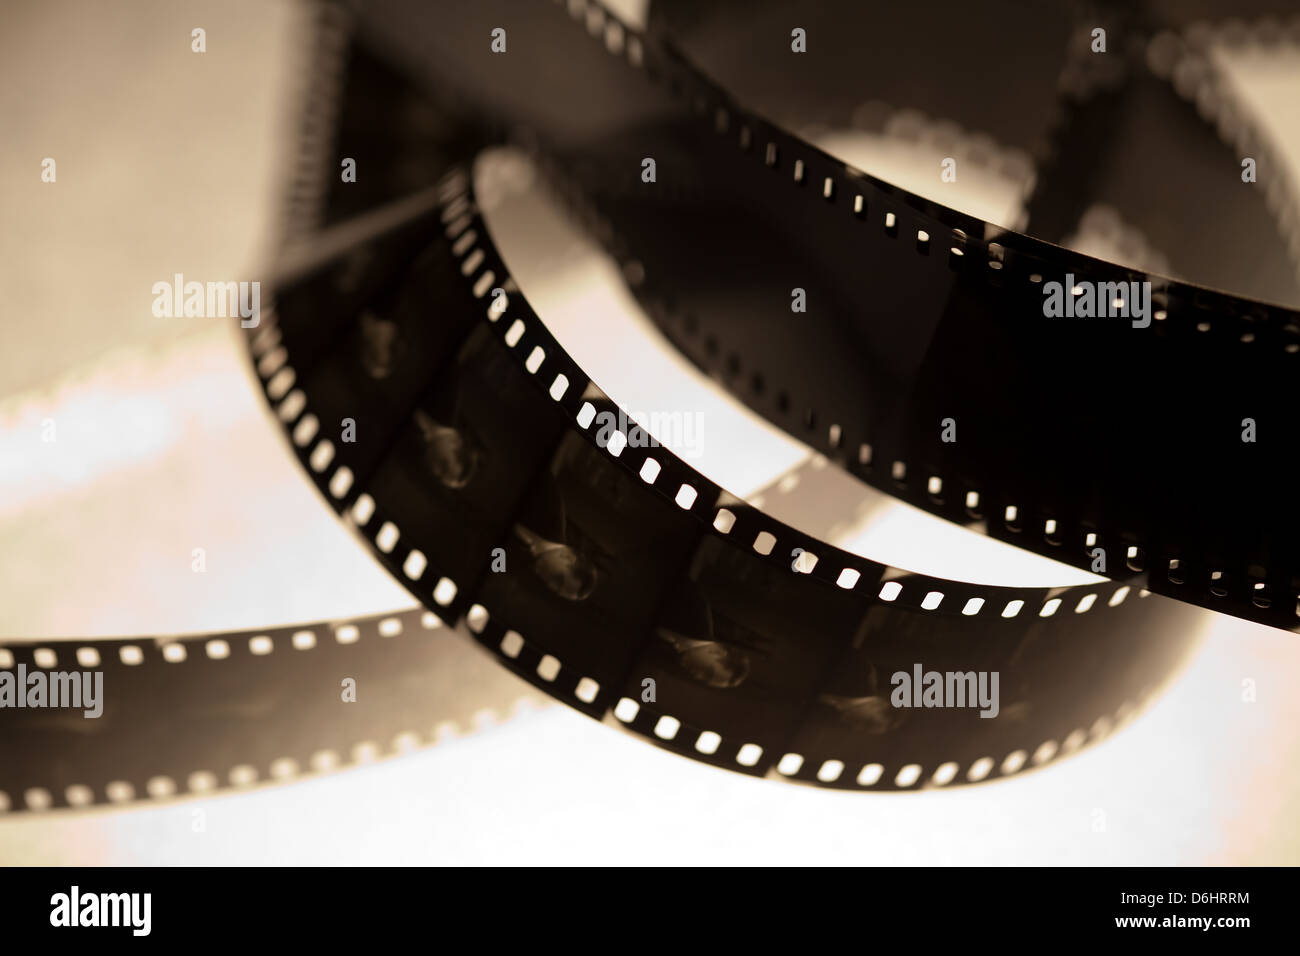 Old celluloid film Stock Photo - Alamy